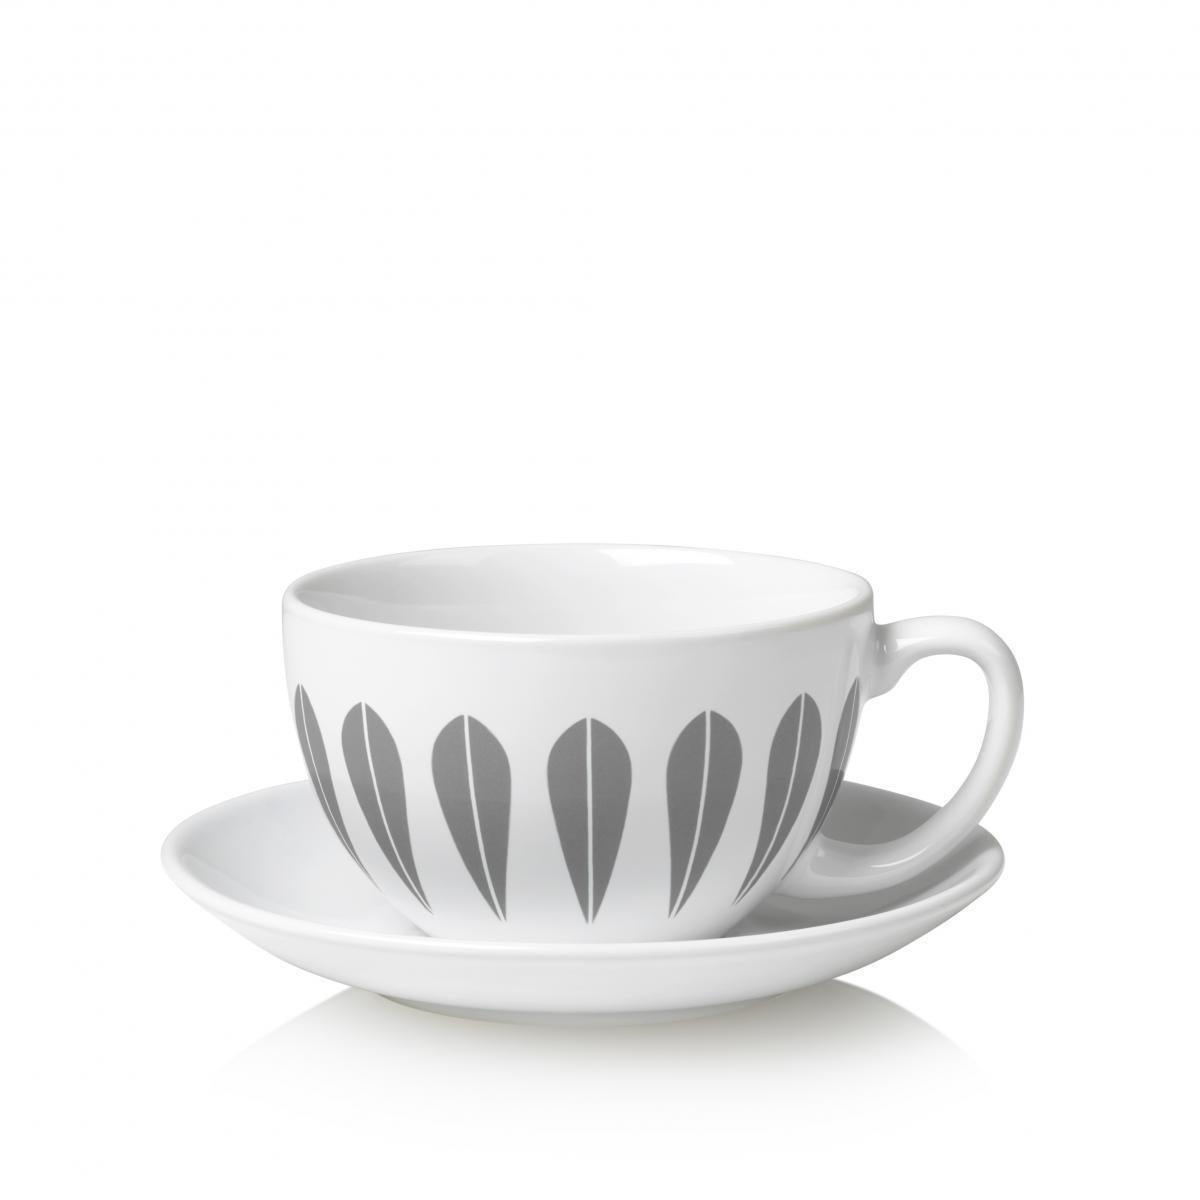 Lucie Kaas Arne Clausen Collection Cups W. Saucer Grey, 10cm